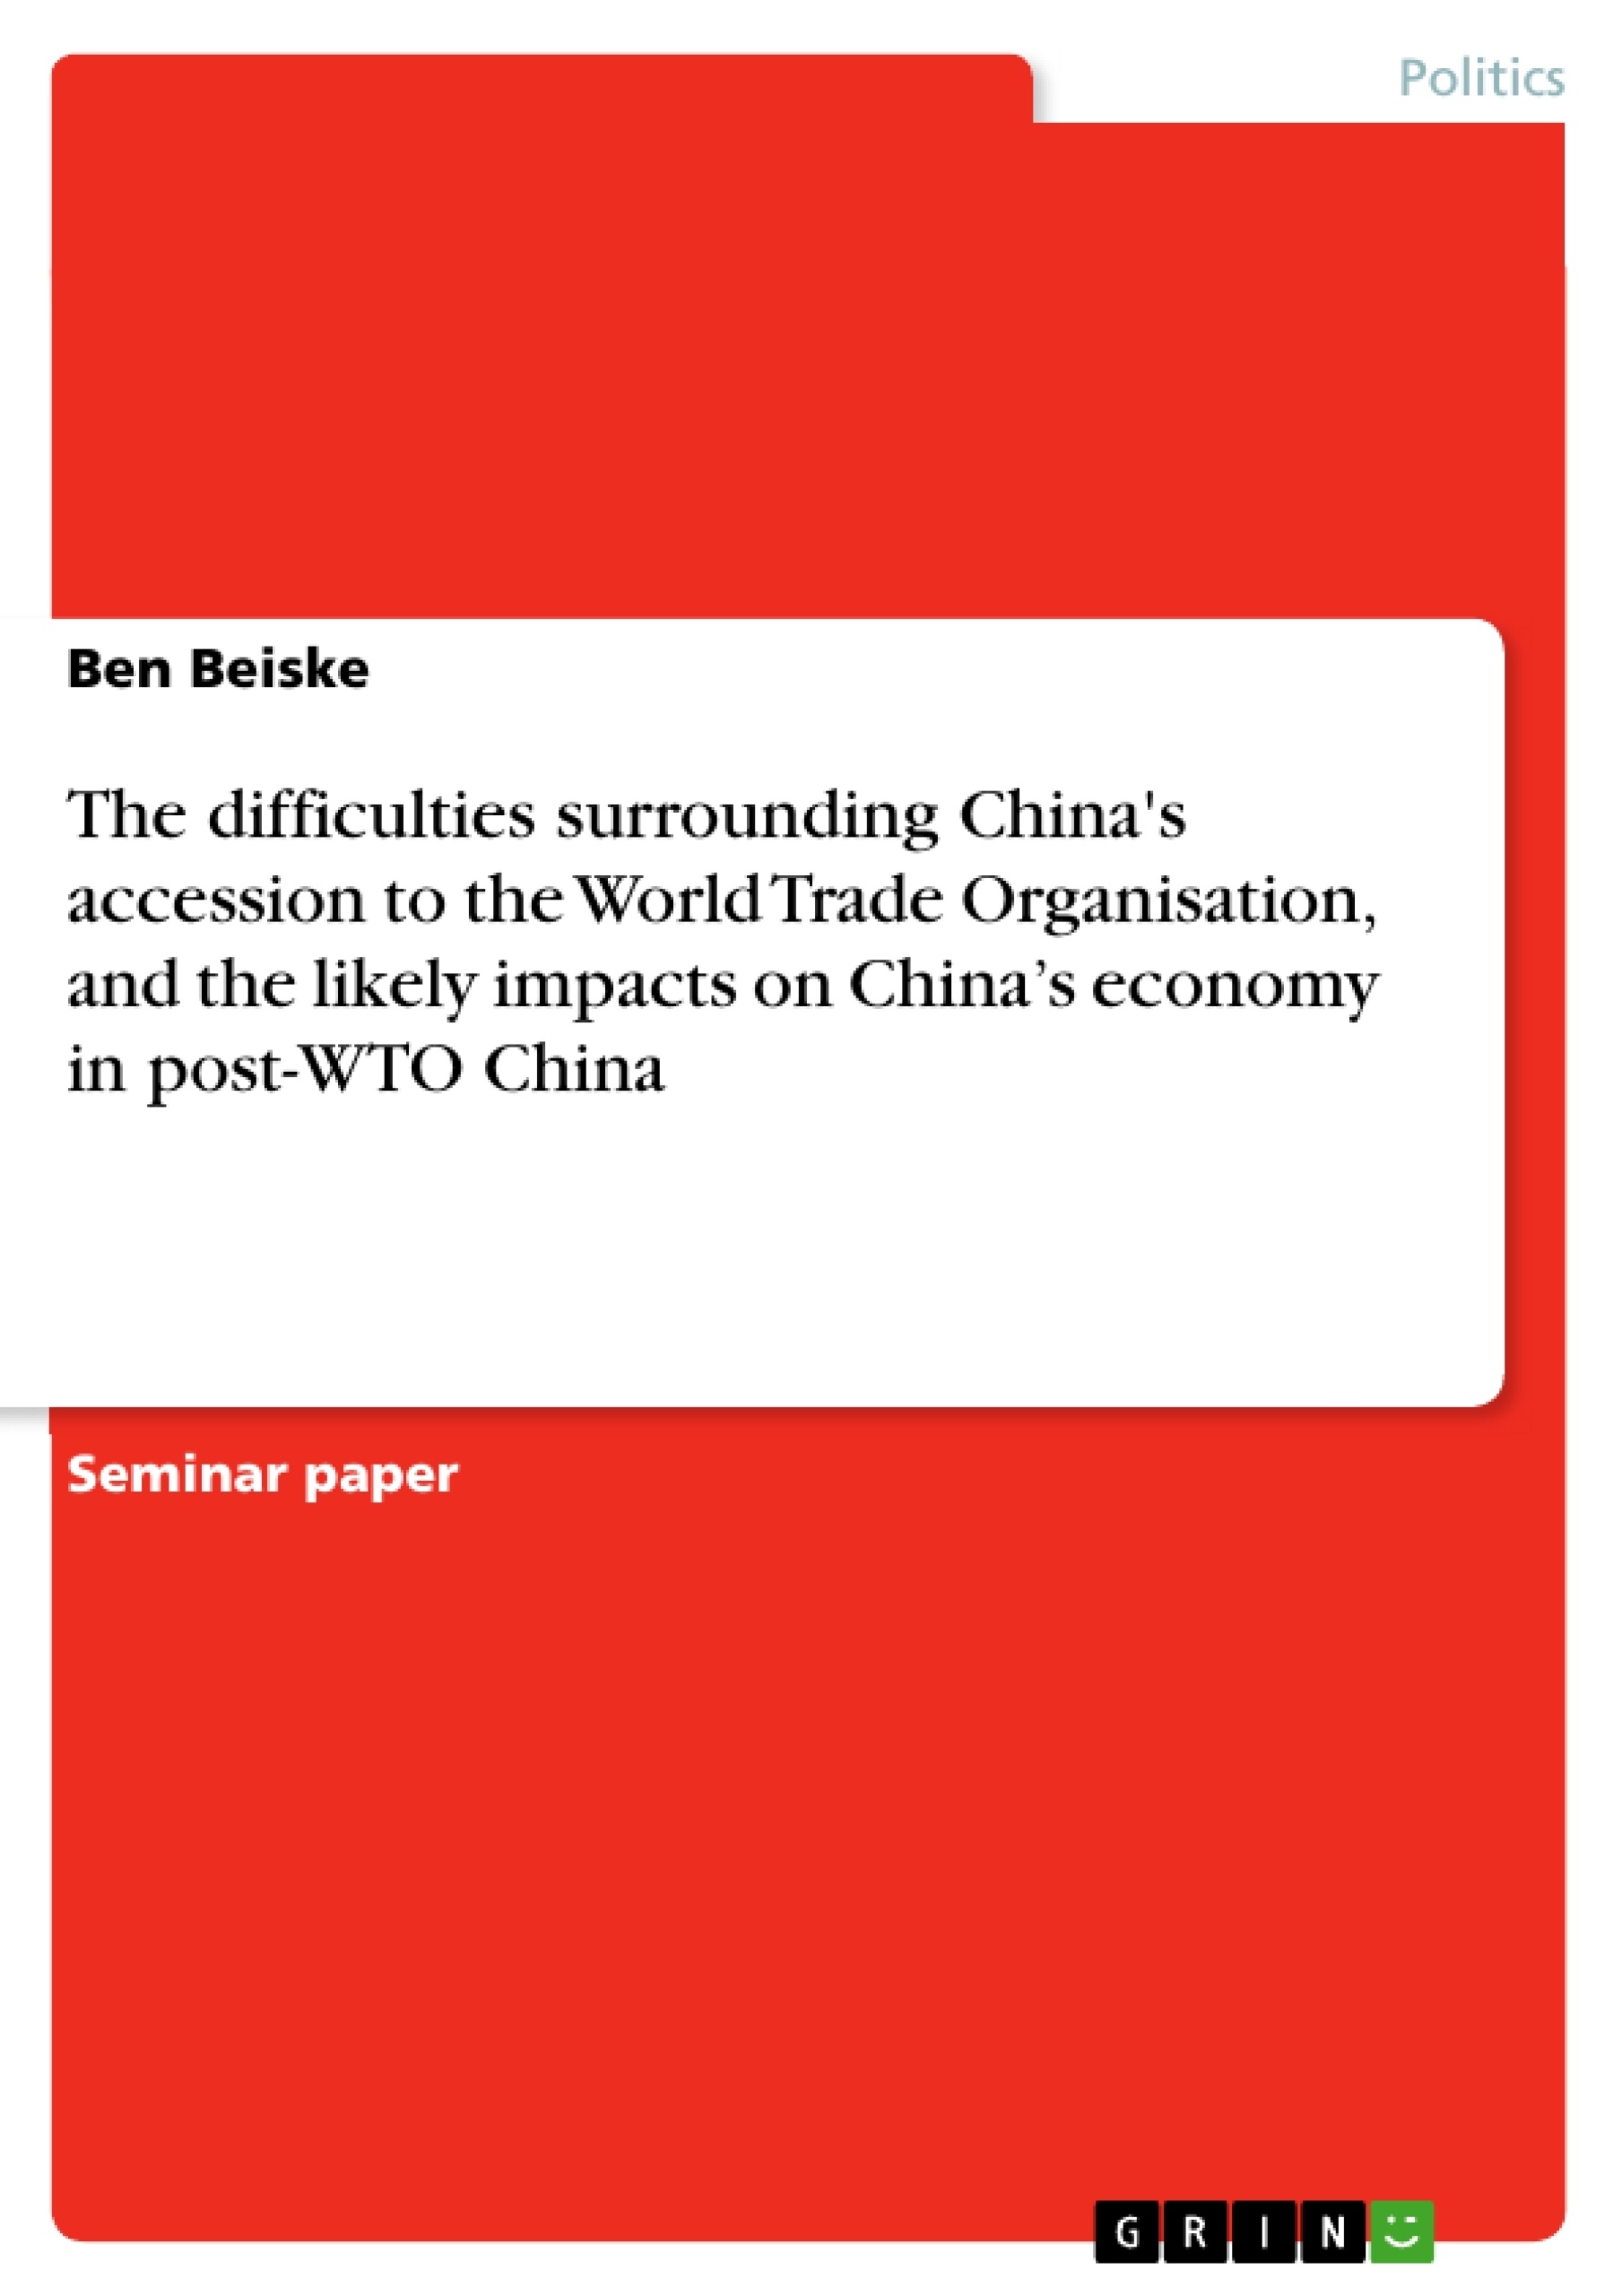 Title: The difficulties surrounding China's accession to the World Trade Organisation, and the likely impacts on China’s economy in post-WTO China